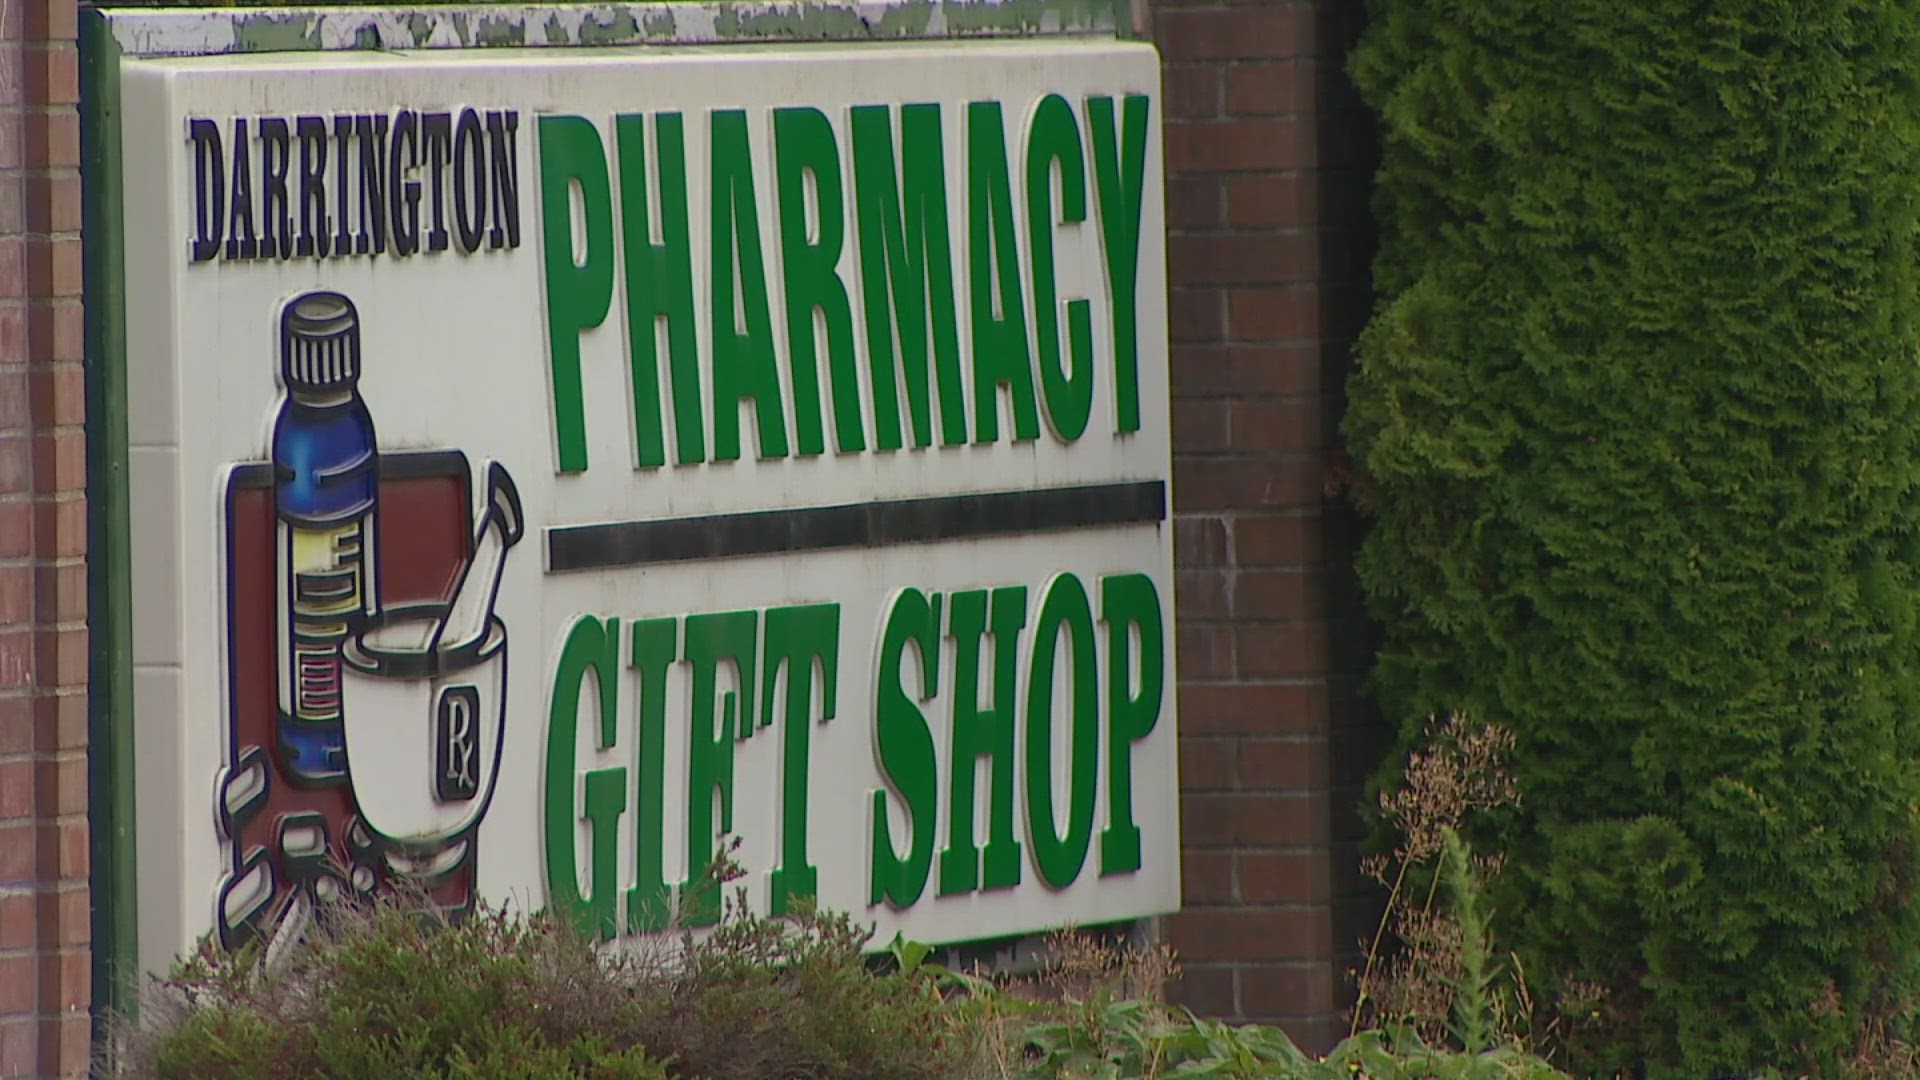 Independent pharmacies are closing at an alarming rate creating drugstore deserts. One about to close in Snohomish County eliminates the small town's only drugstore.